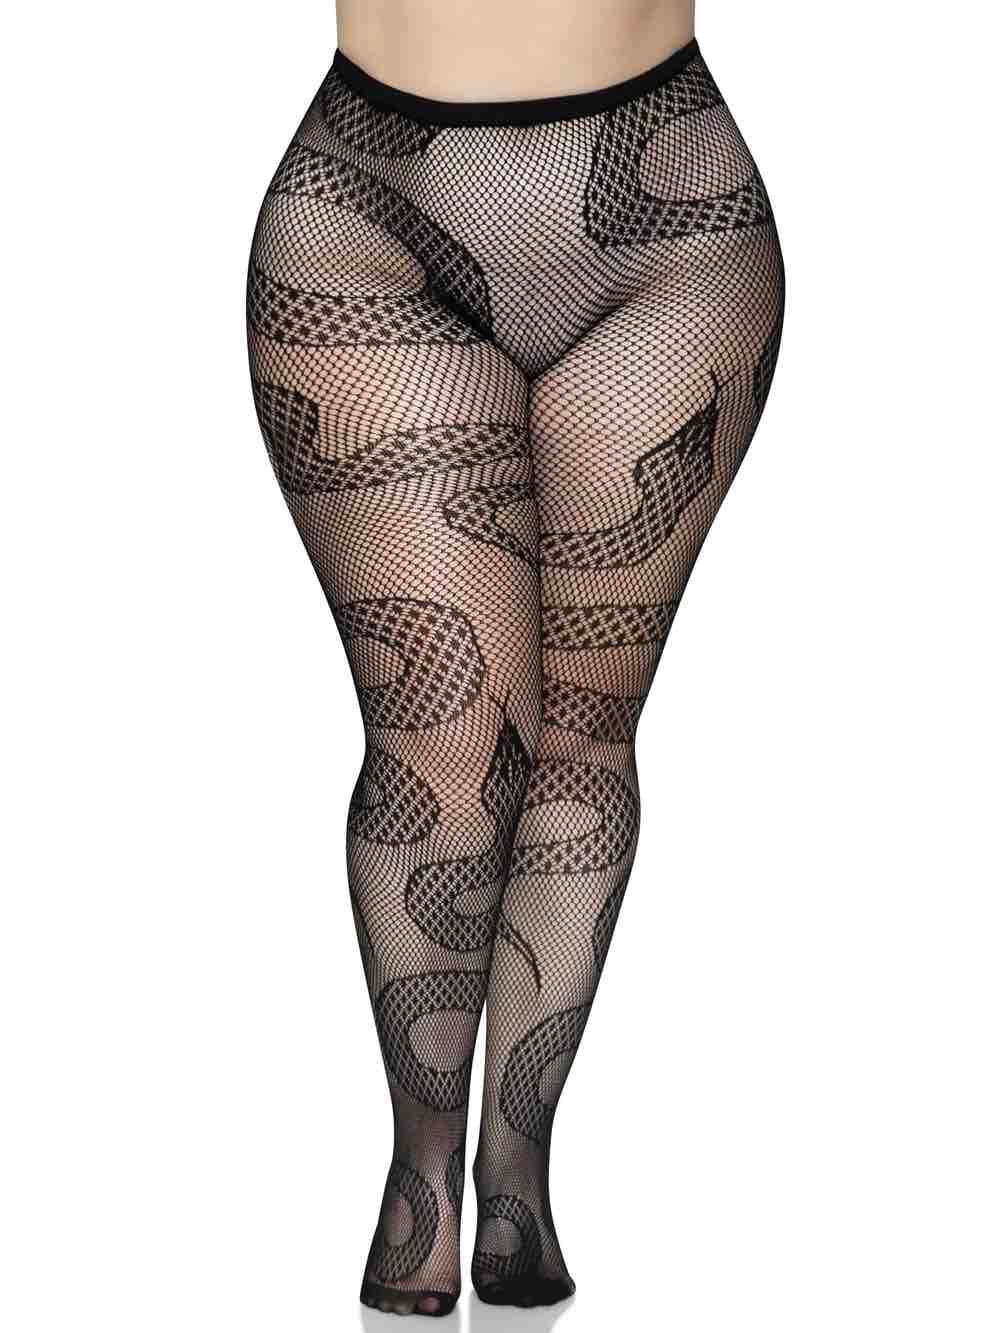 A plus size model wearing the Snake Net Tights over nude underwear, front view.